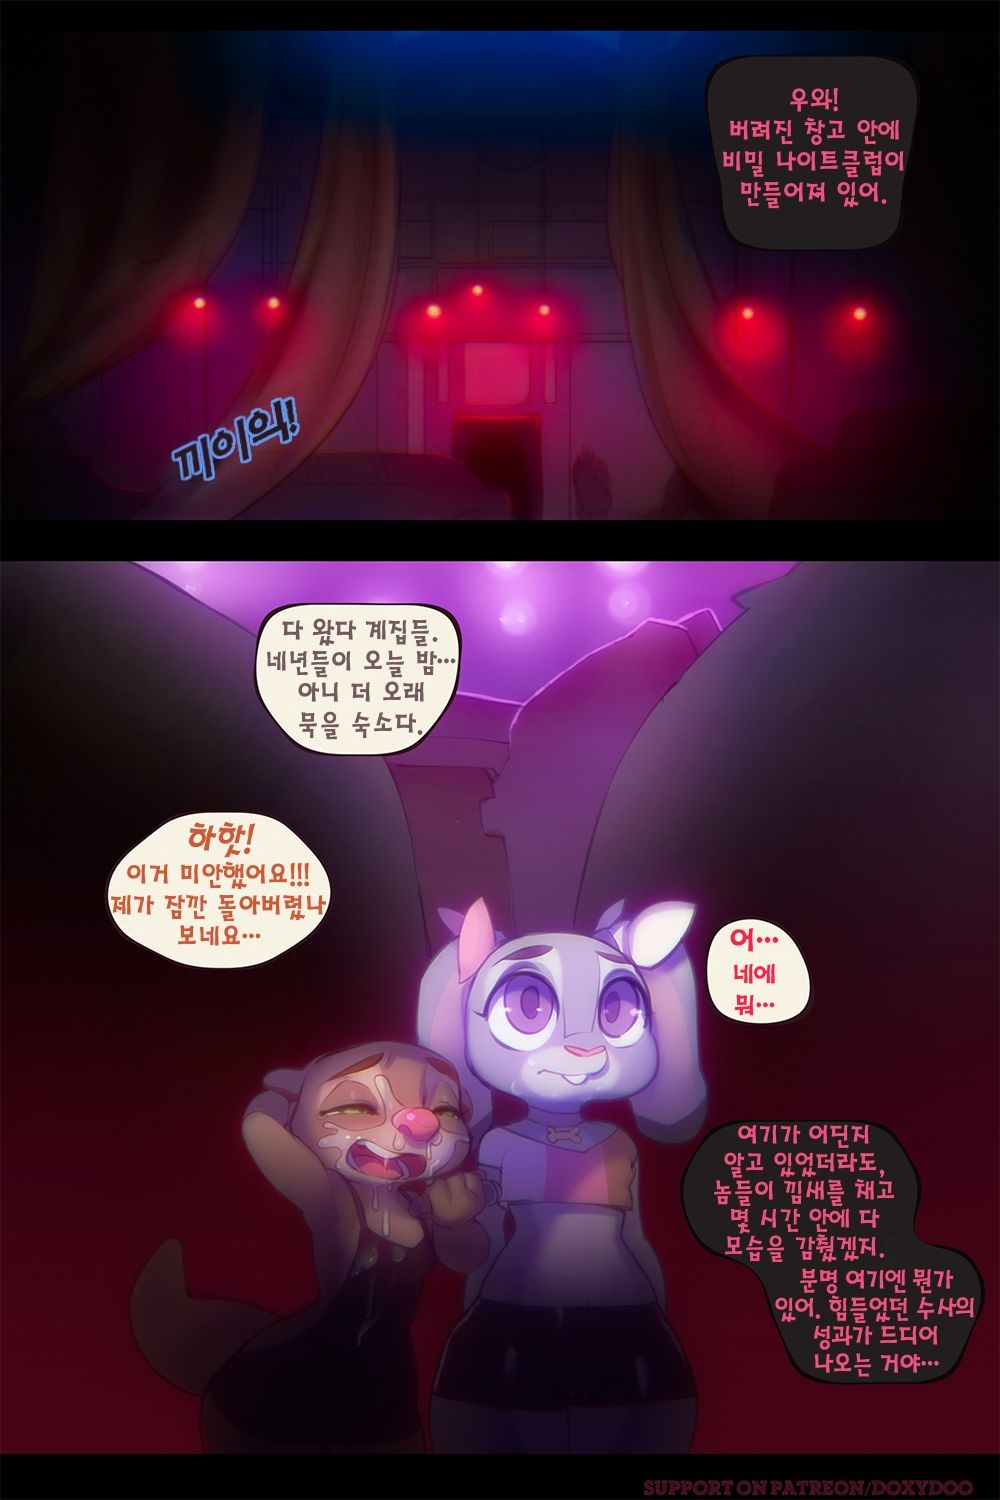 [Doxy] Sweet Sting Part 2: Down The Rabbit Hole | 달콤한 함정수사 2부: 토끼 굴속으로 (Zootopia) [Korean] [Ongoing] 18